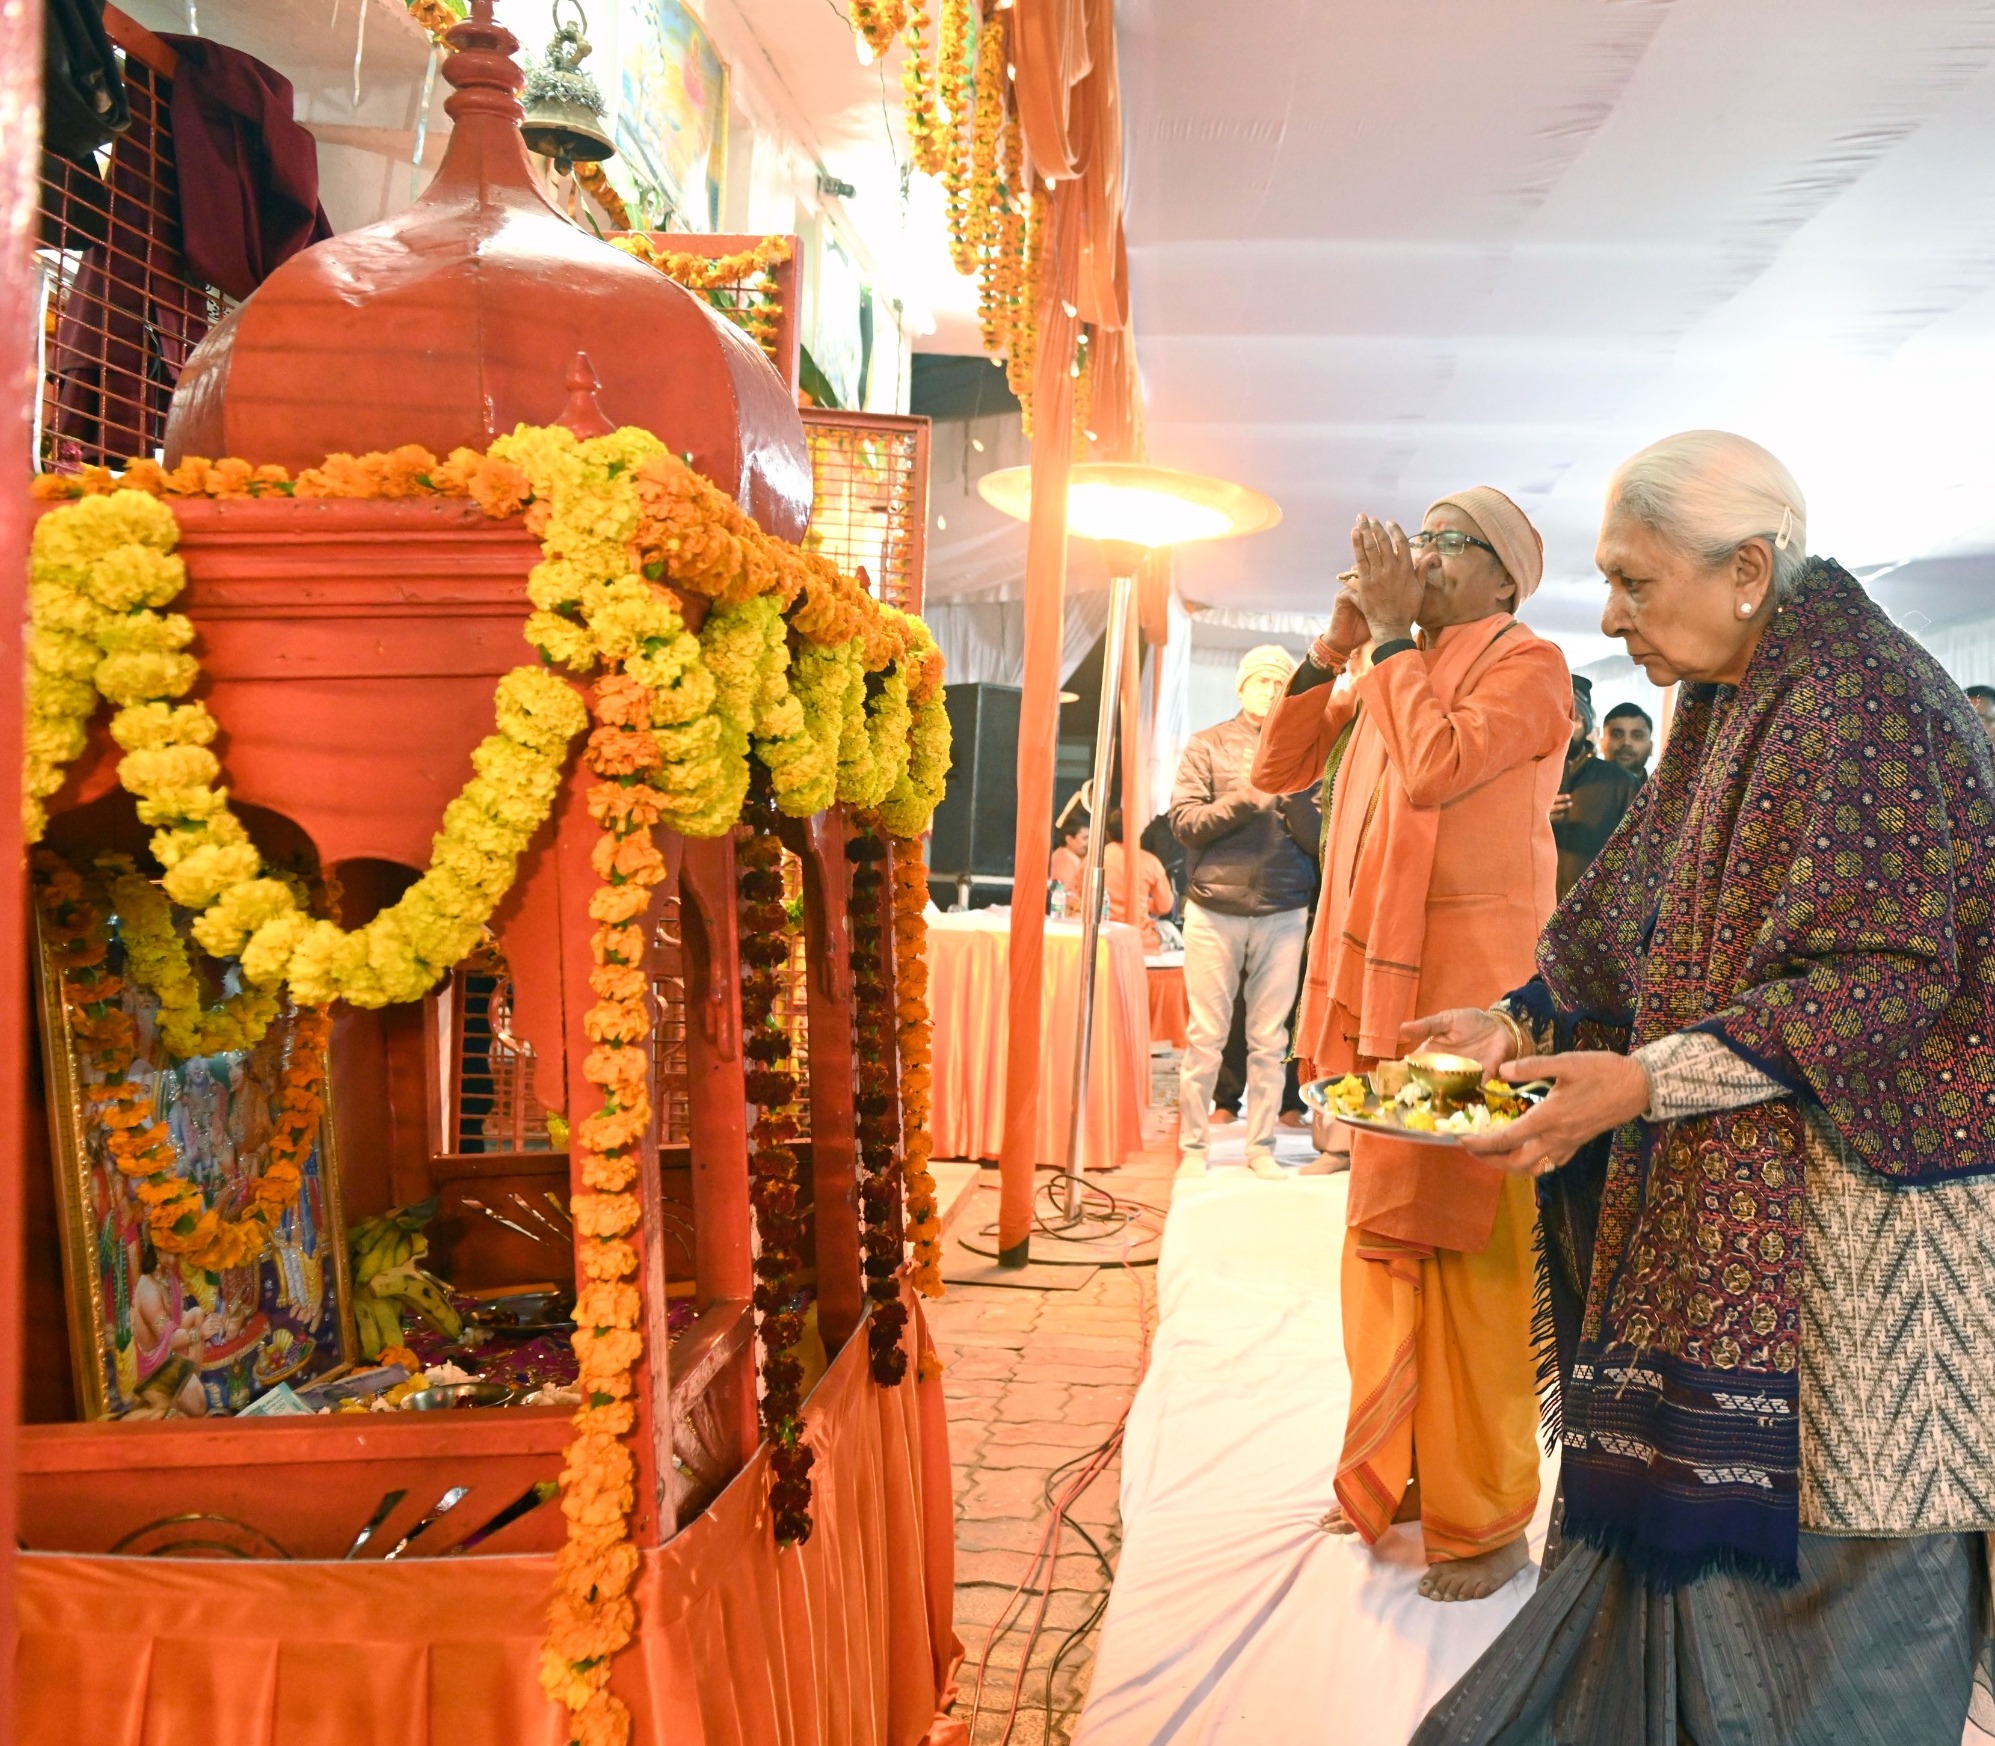 The Governor performed aarti and worshipped at the temple located at Raj Bhavan on the occasion of the consecration of Lord Shri Ram Ji.